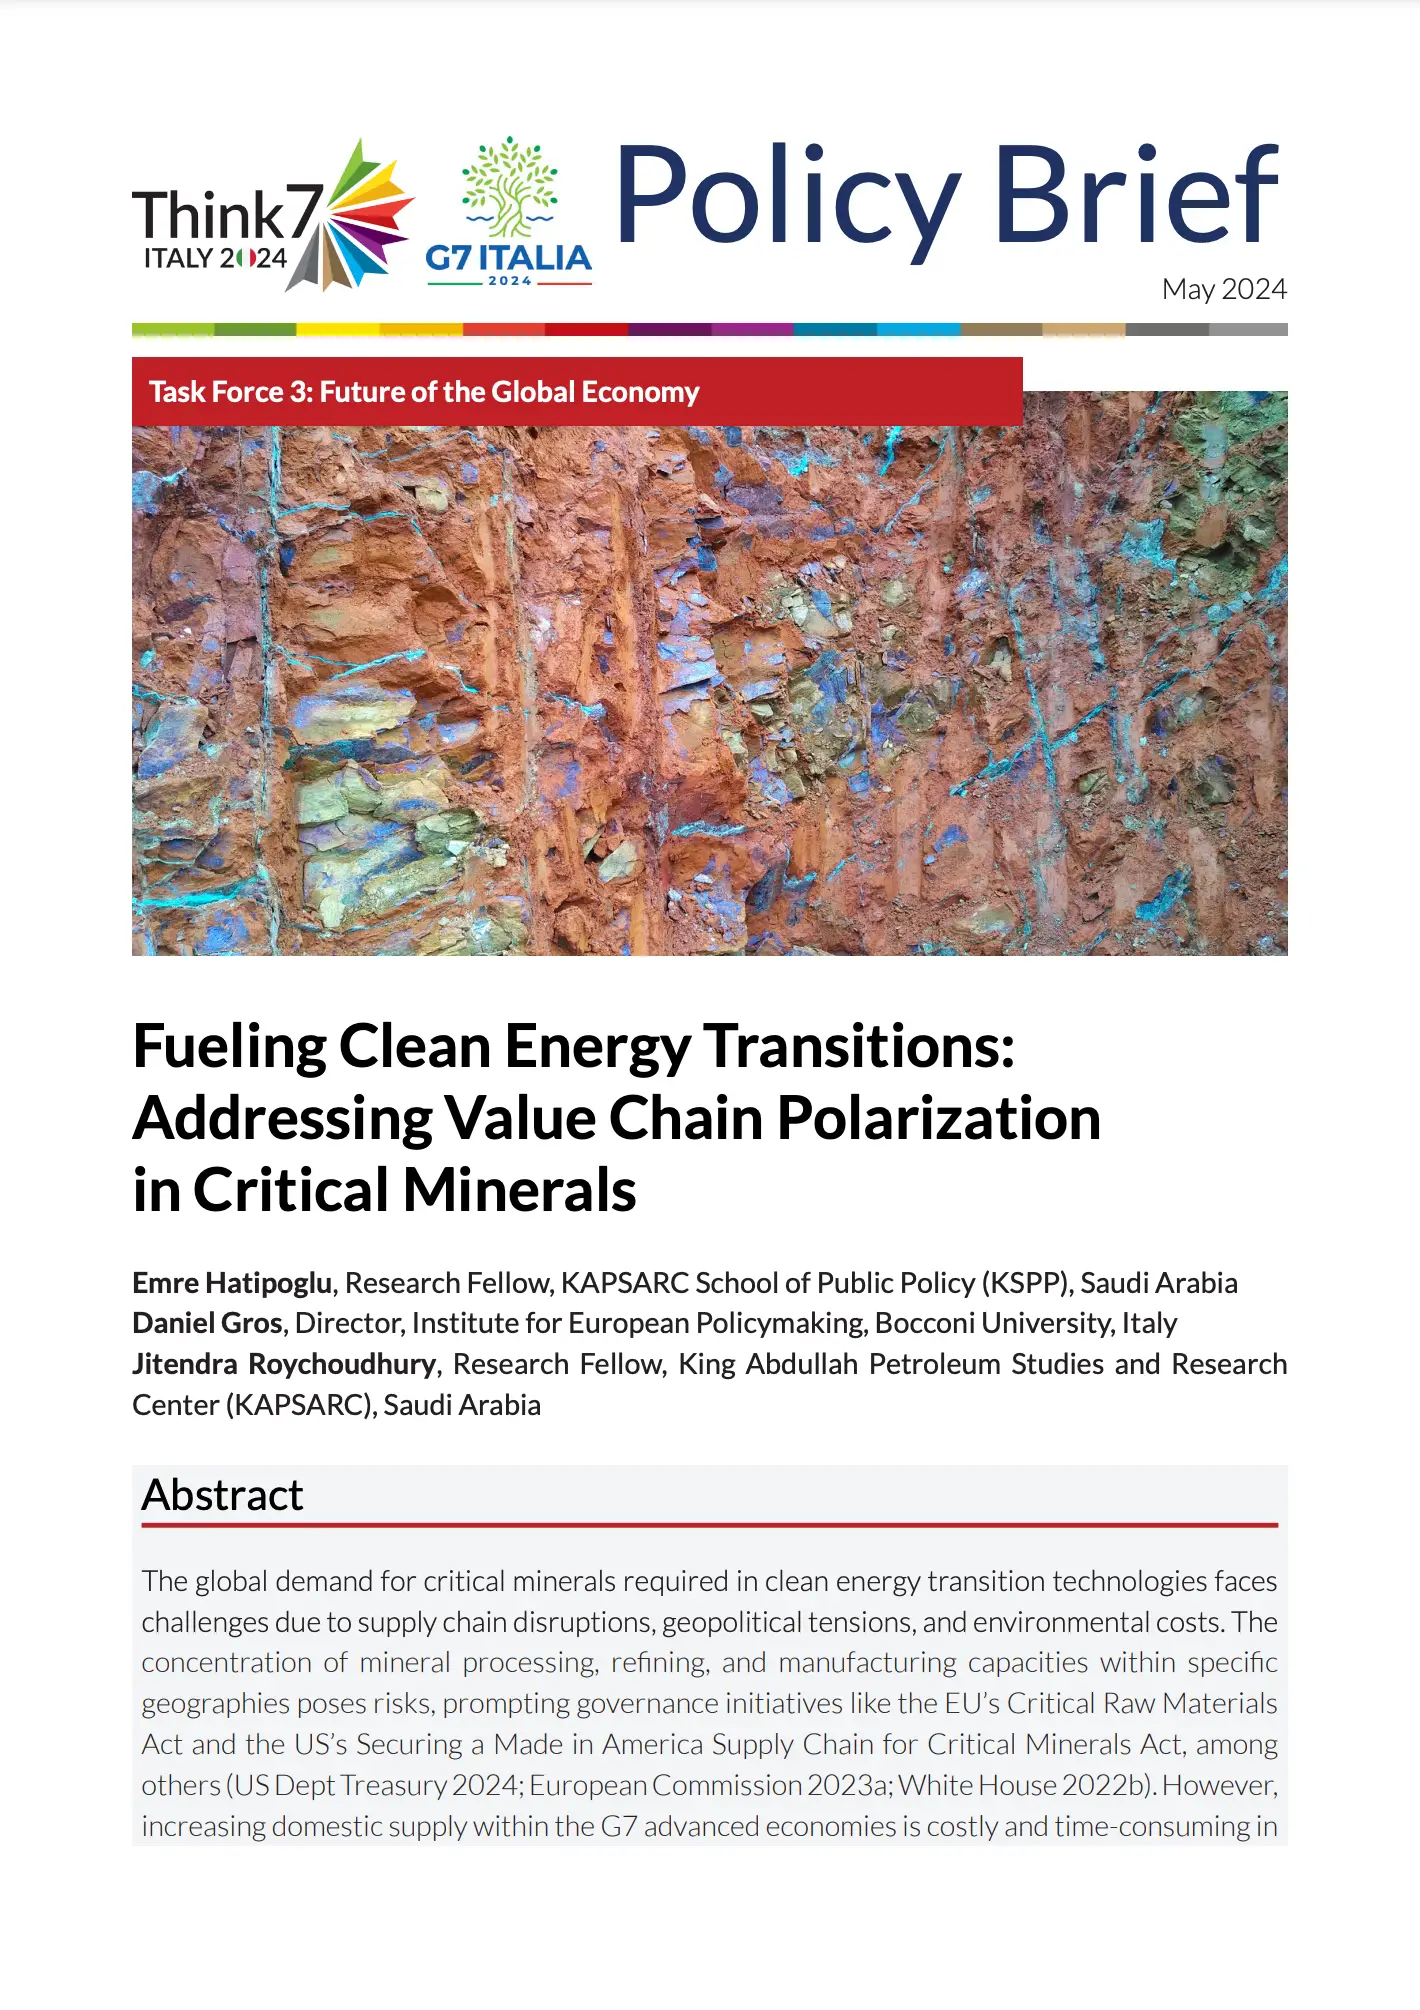 Fueling Clean Energy Transitions: Addressing Value Chain Polarization in Critical Minerals